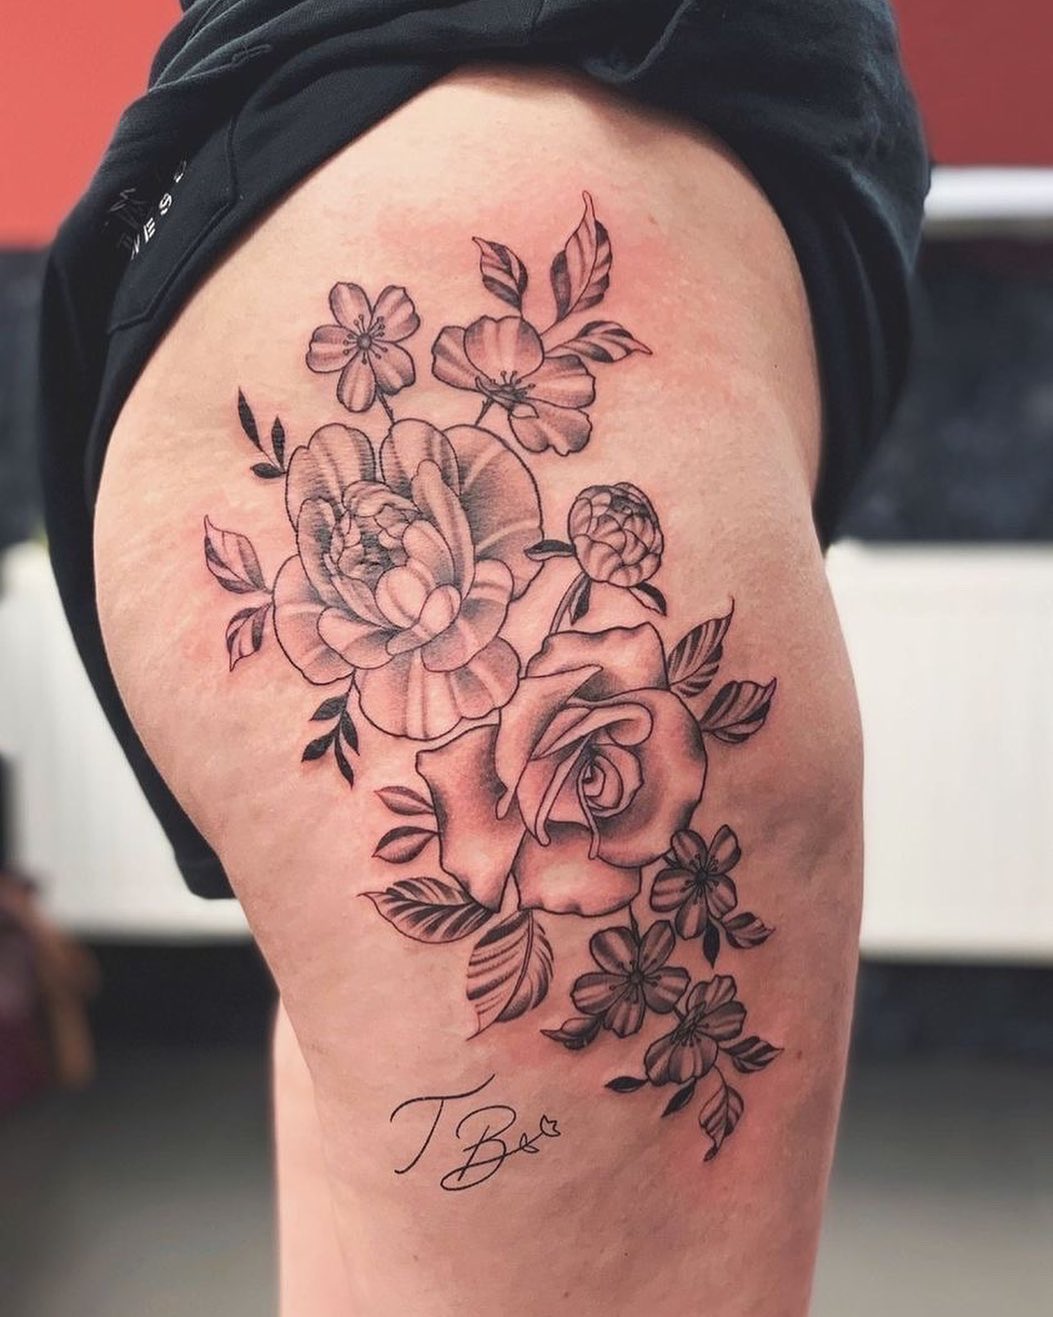 🌸🌸🌸

Done at studioxiiigallery 

I am away on holiday for the next three weeks! My assistant will still be responding to messages but if she is dealing with something that she needs any clarification from me on, you may need to wait until I return for a final price ✨

         totaltattoo   